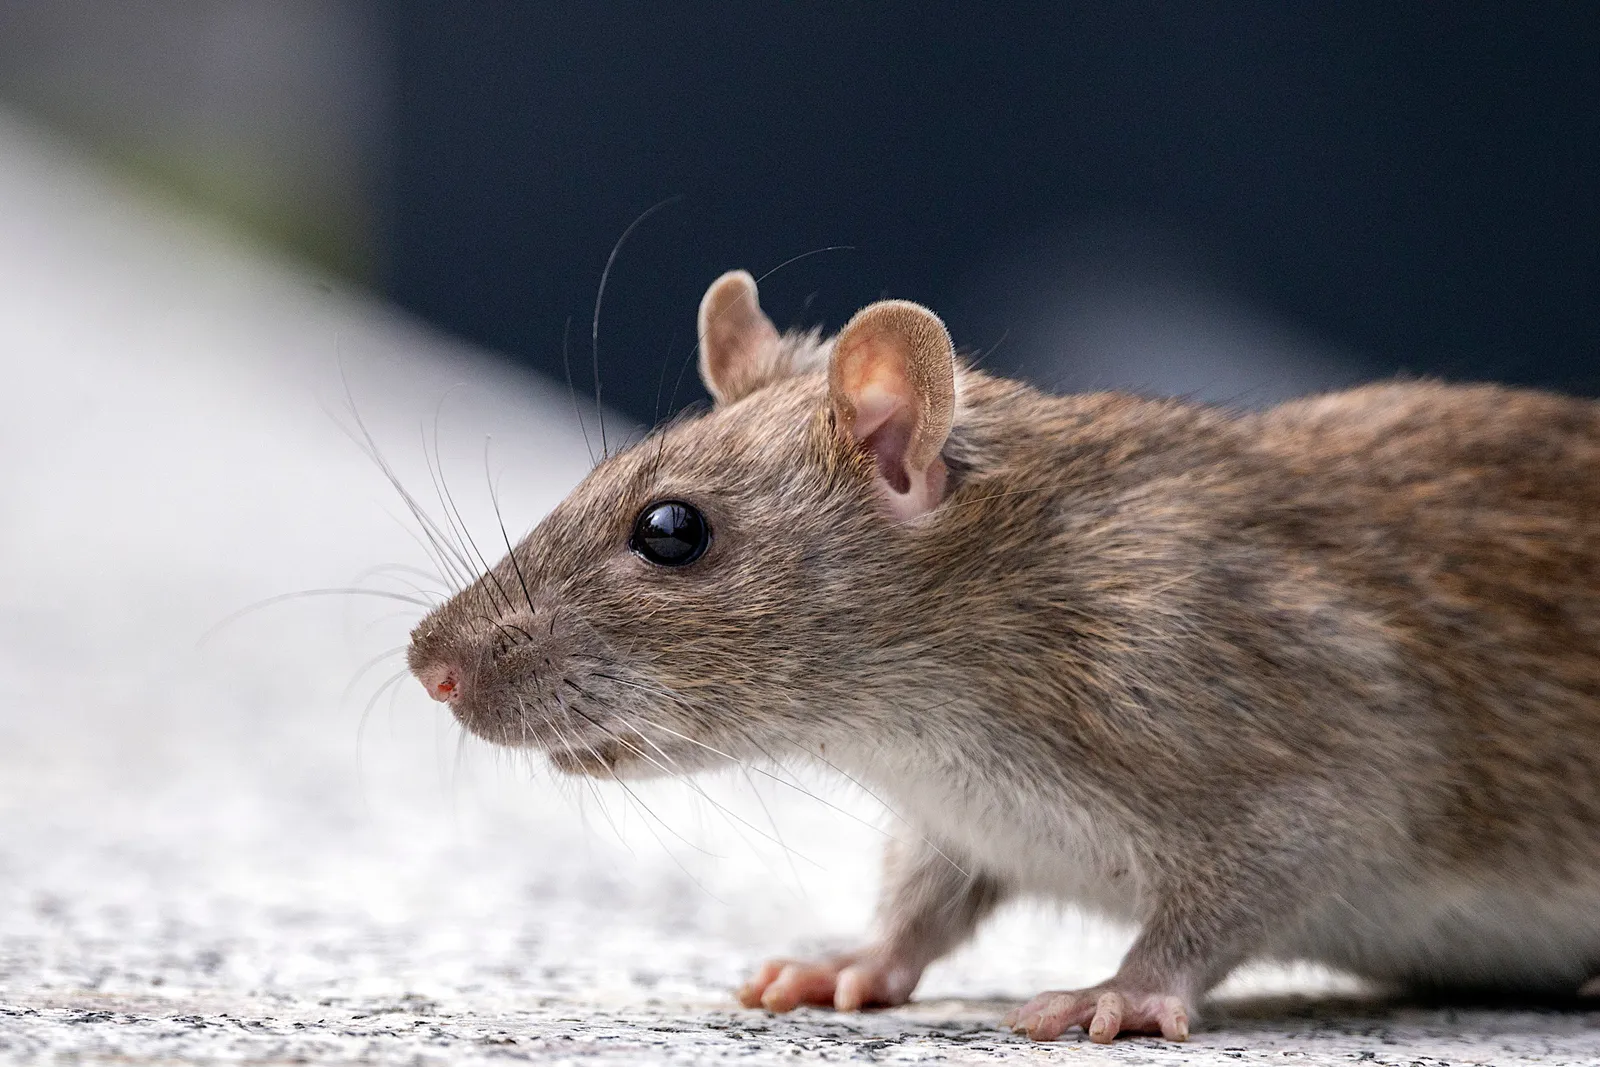 Rats Can Use Imagination to Navigate in Virtual Reality, Study